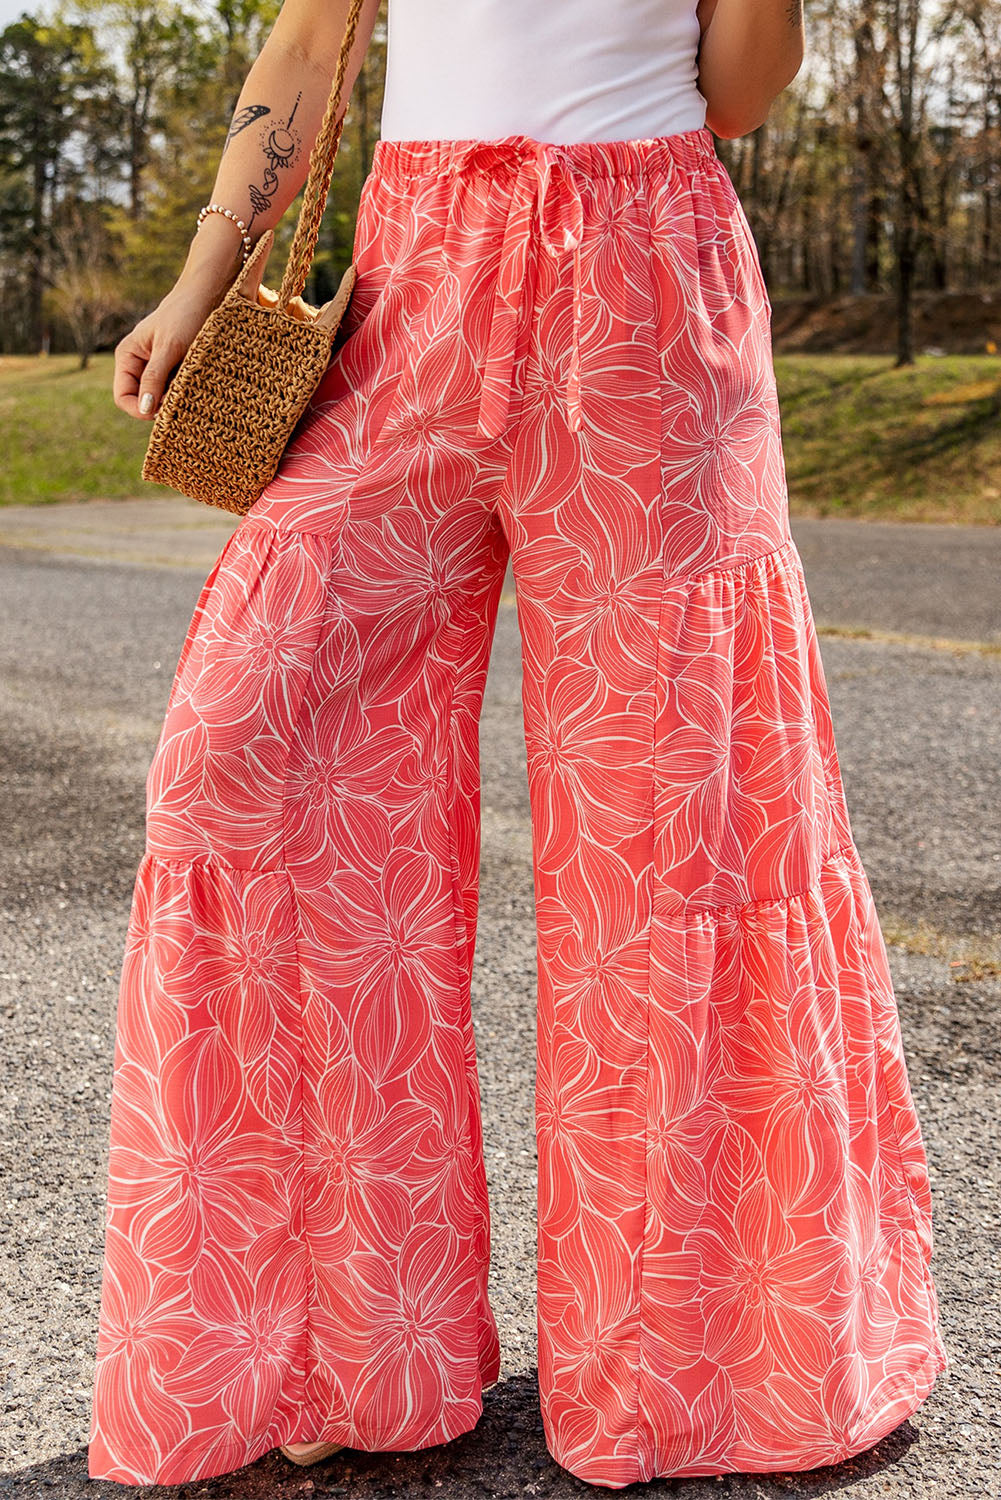 Pool Deck Floral Pants - Cheeky Chic Boutique